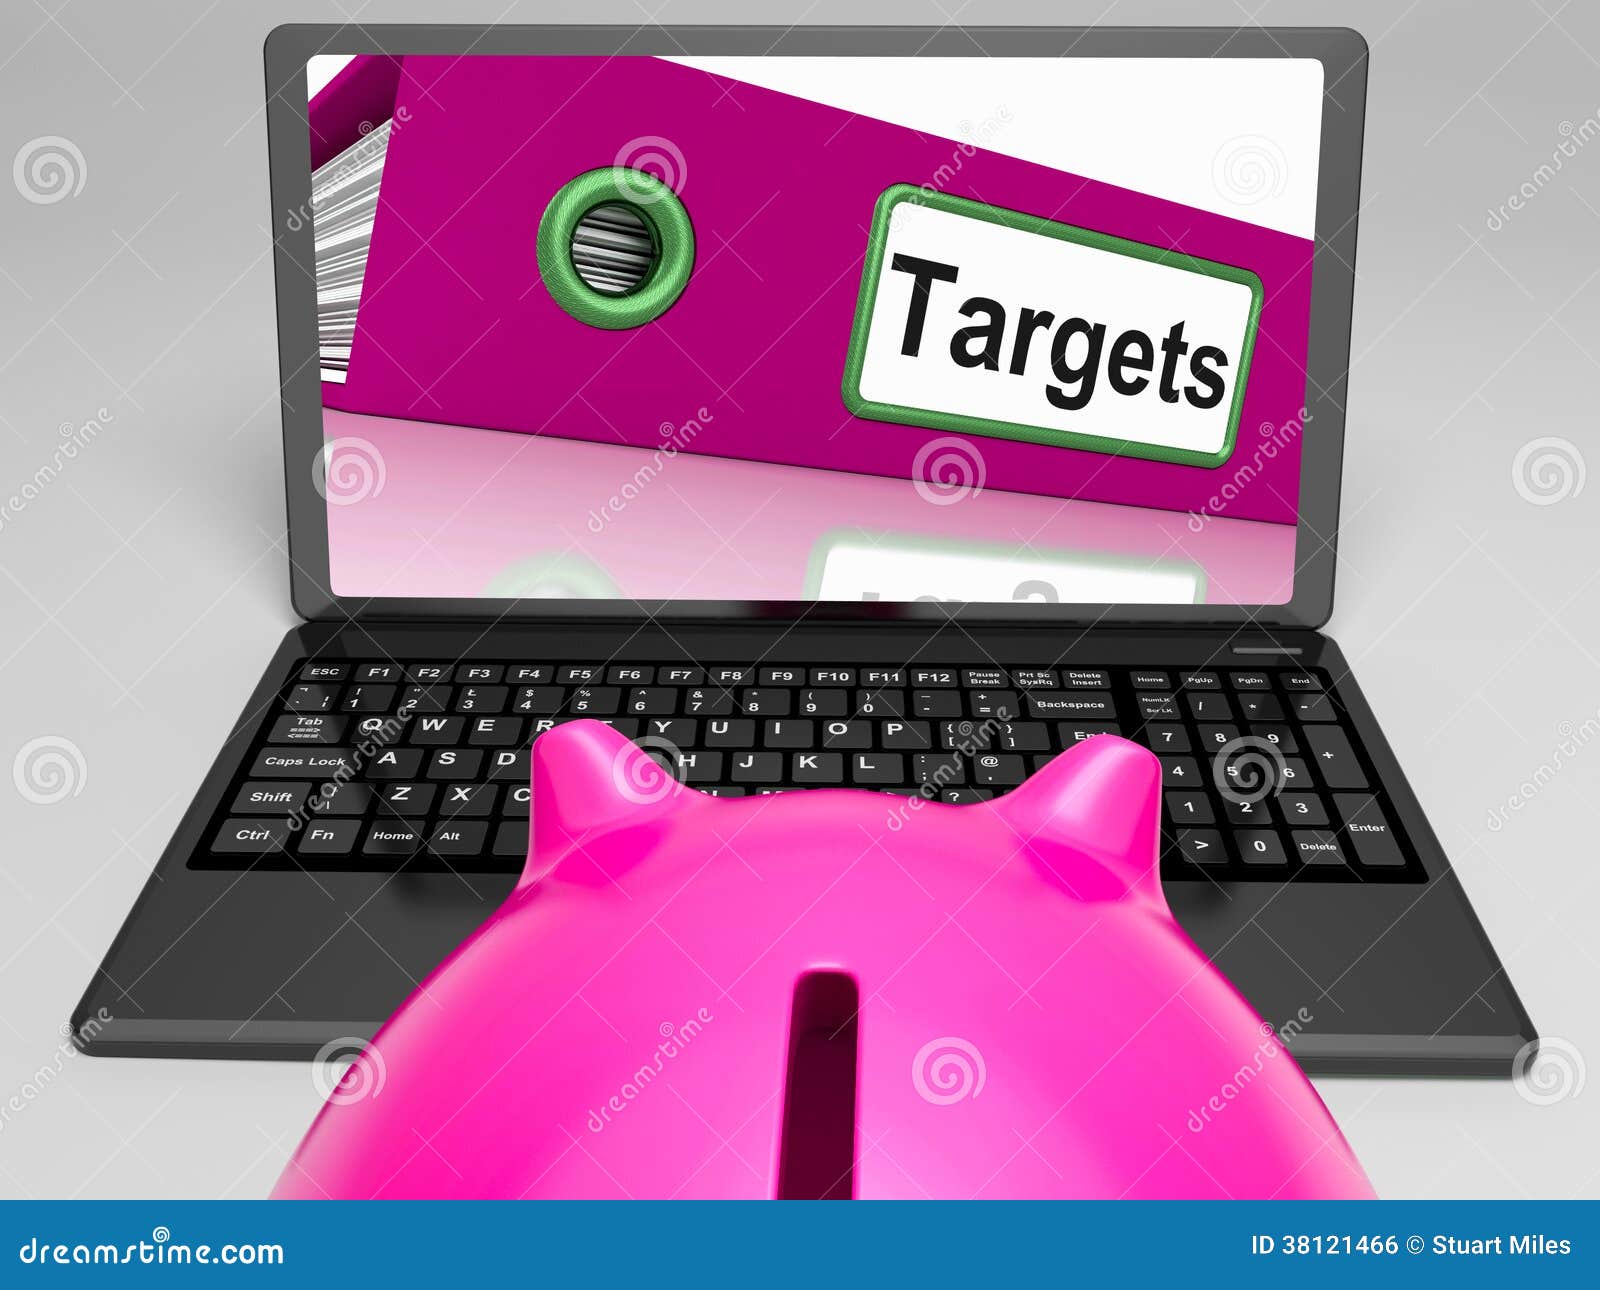 targets laptop means aims objectives